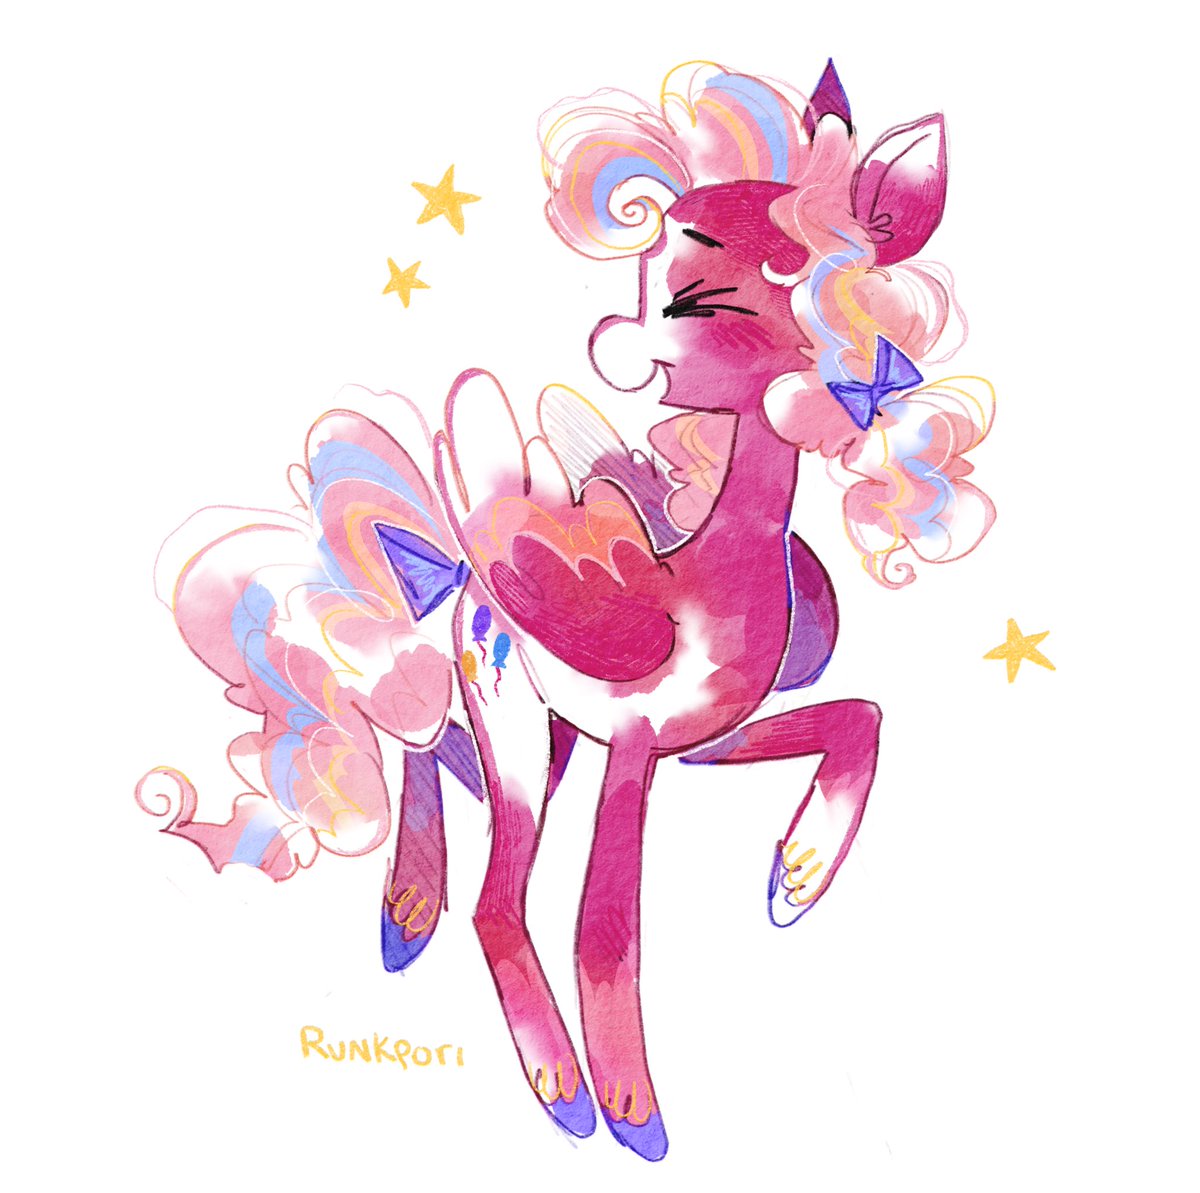 「pinkie pie redesign 」|henry⌛️のイラスト